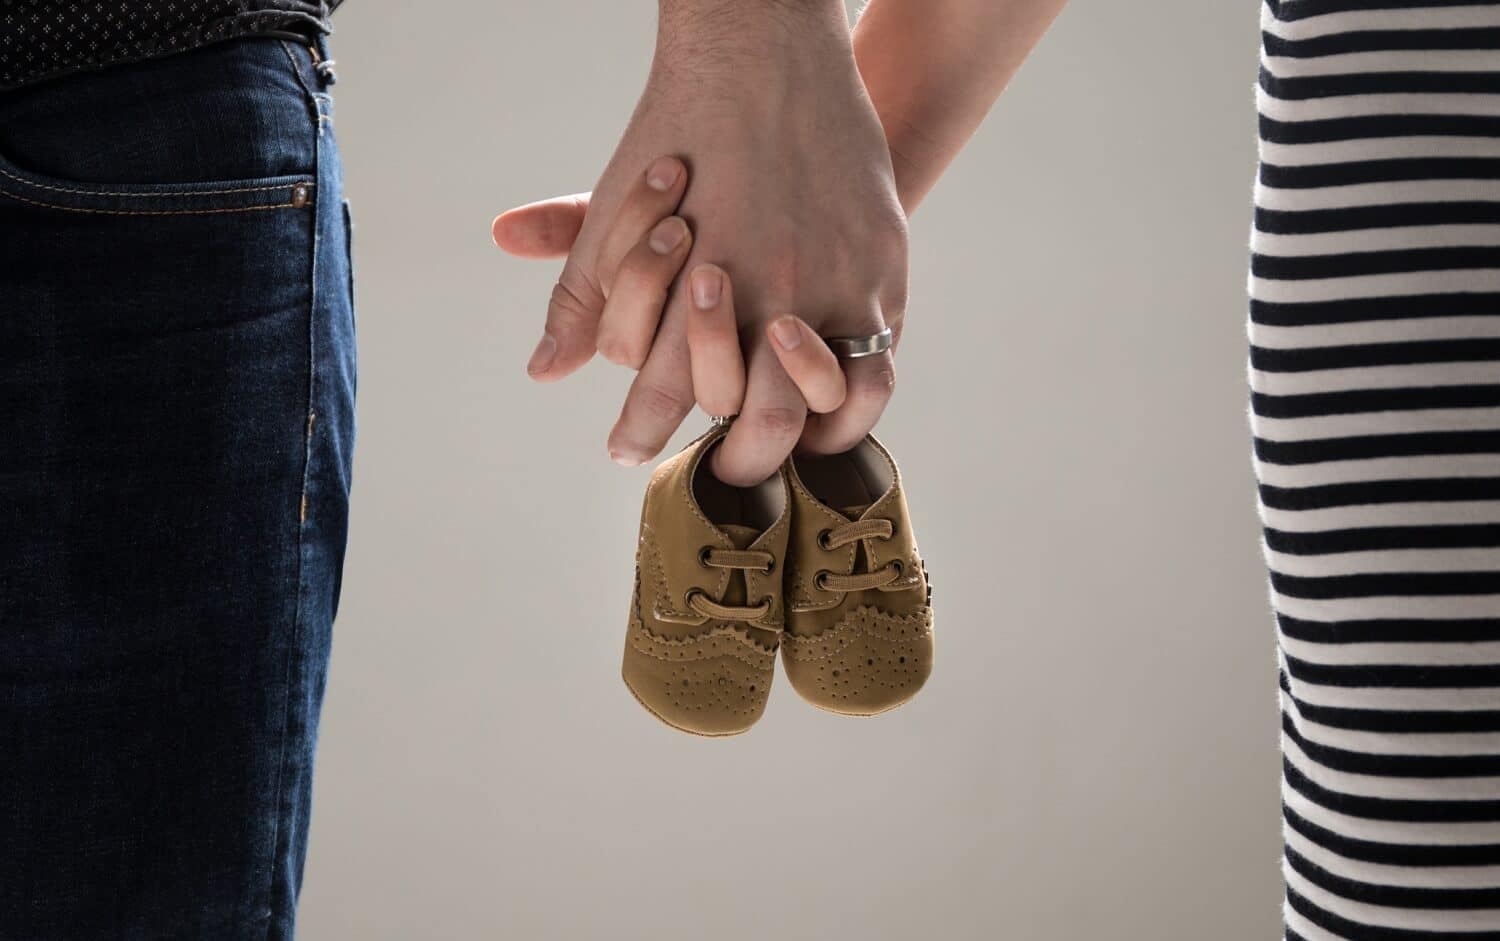 A couple holding hands and a pair of baby shoes